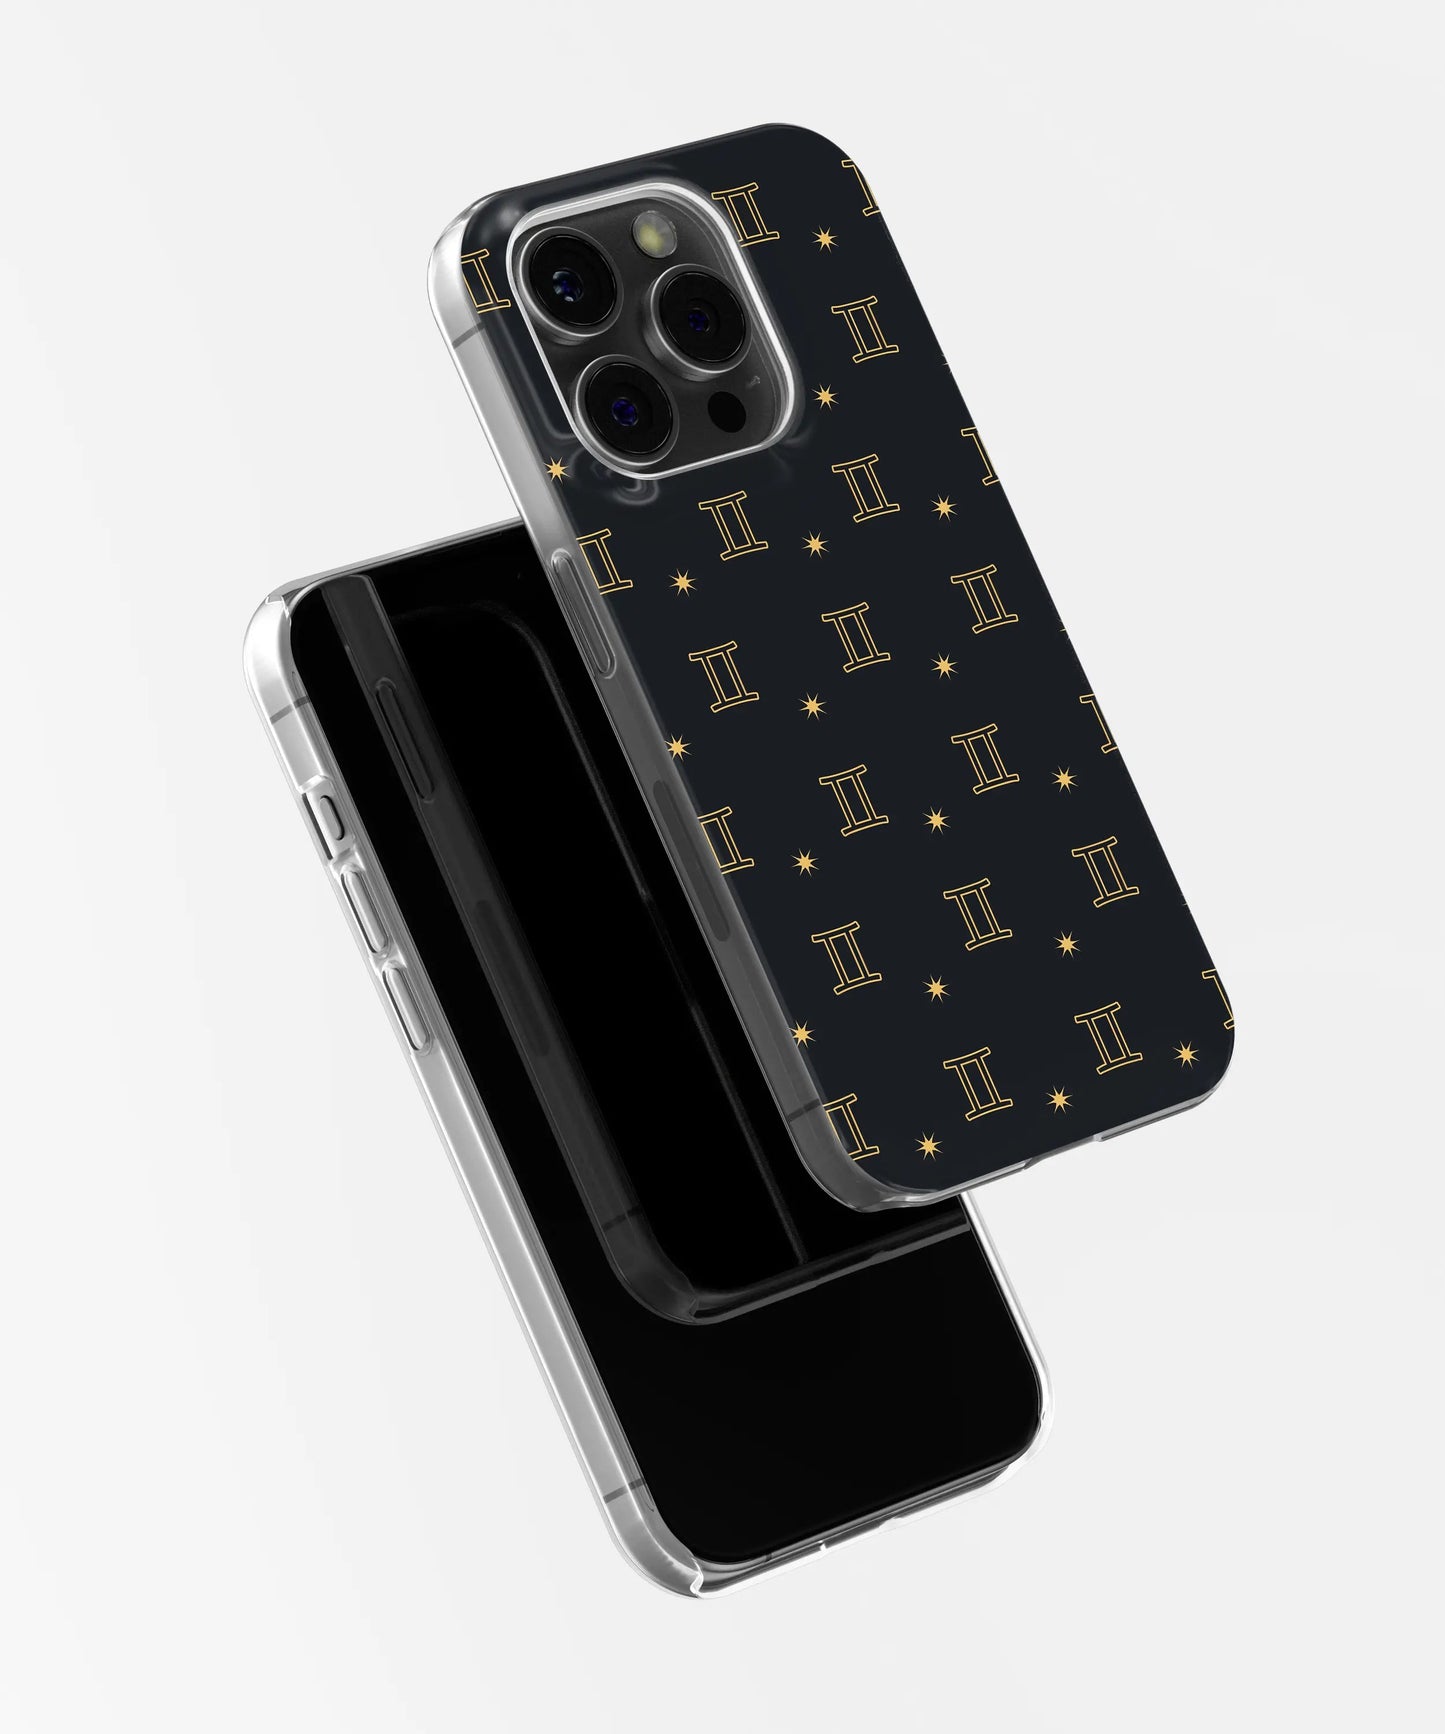 Gemini Reflections: Dual-Faced Case - iPhone Case Soft Case